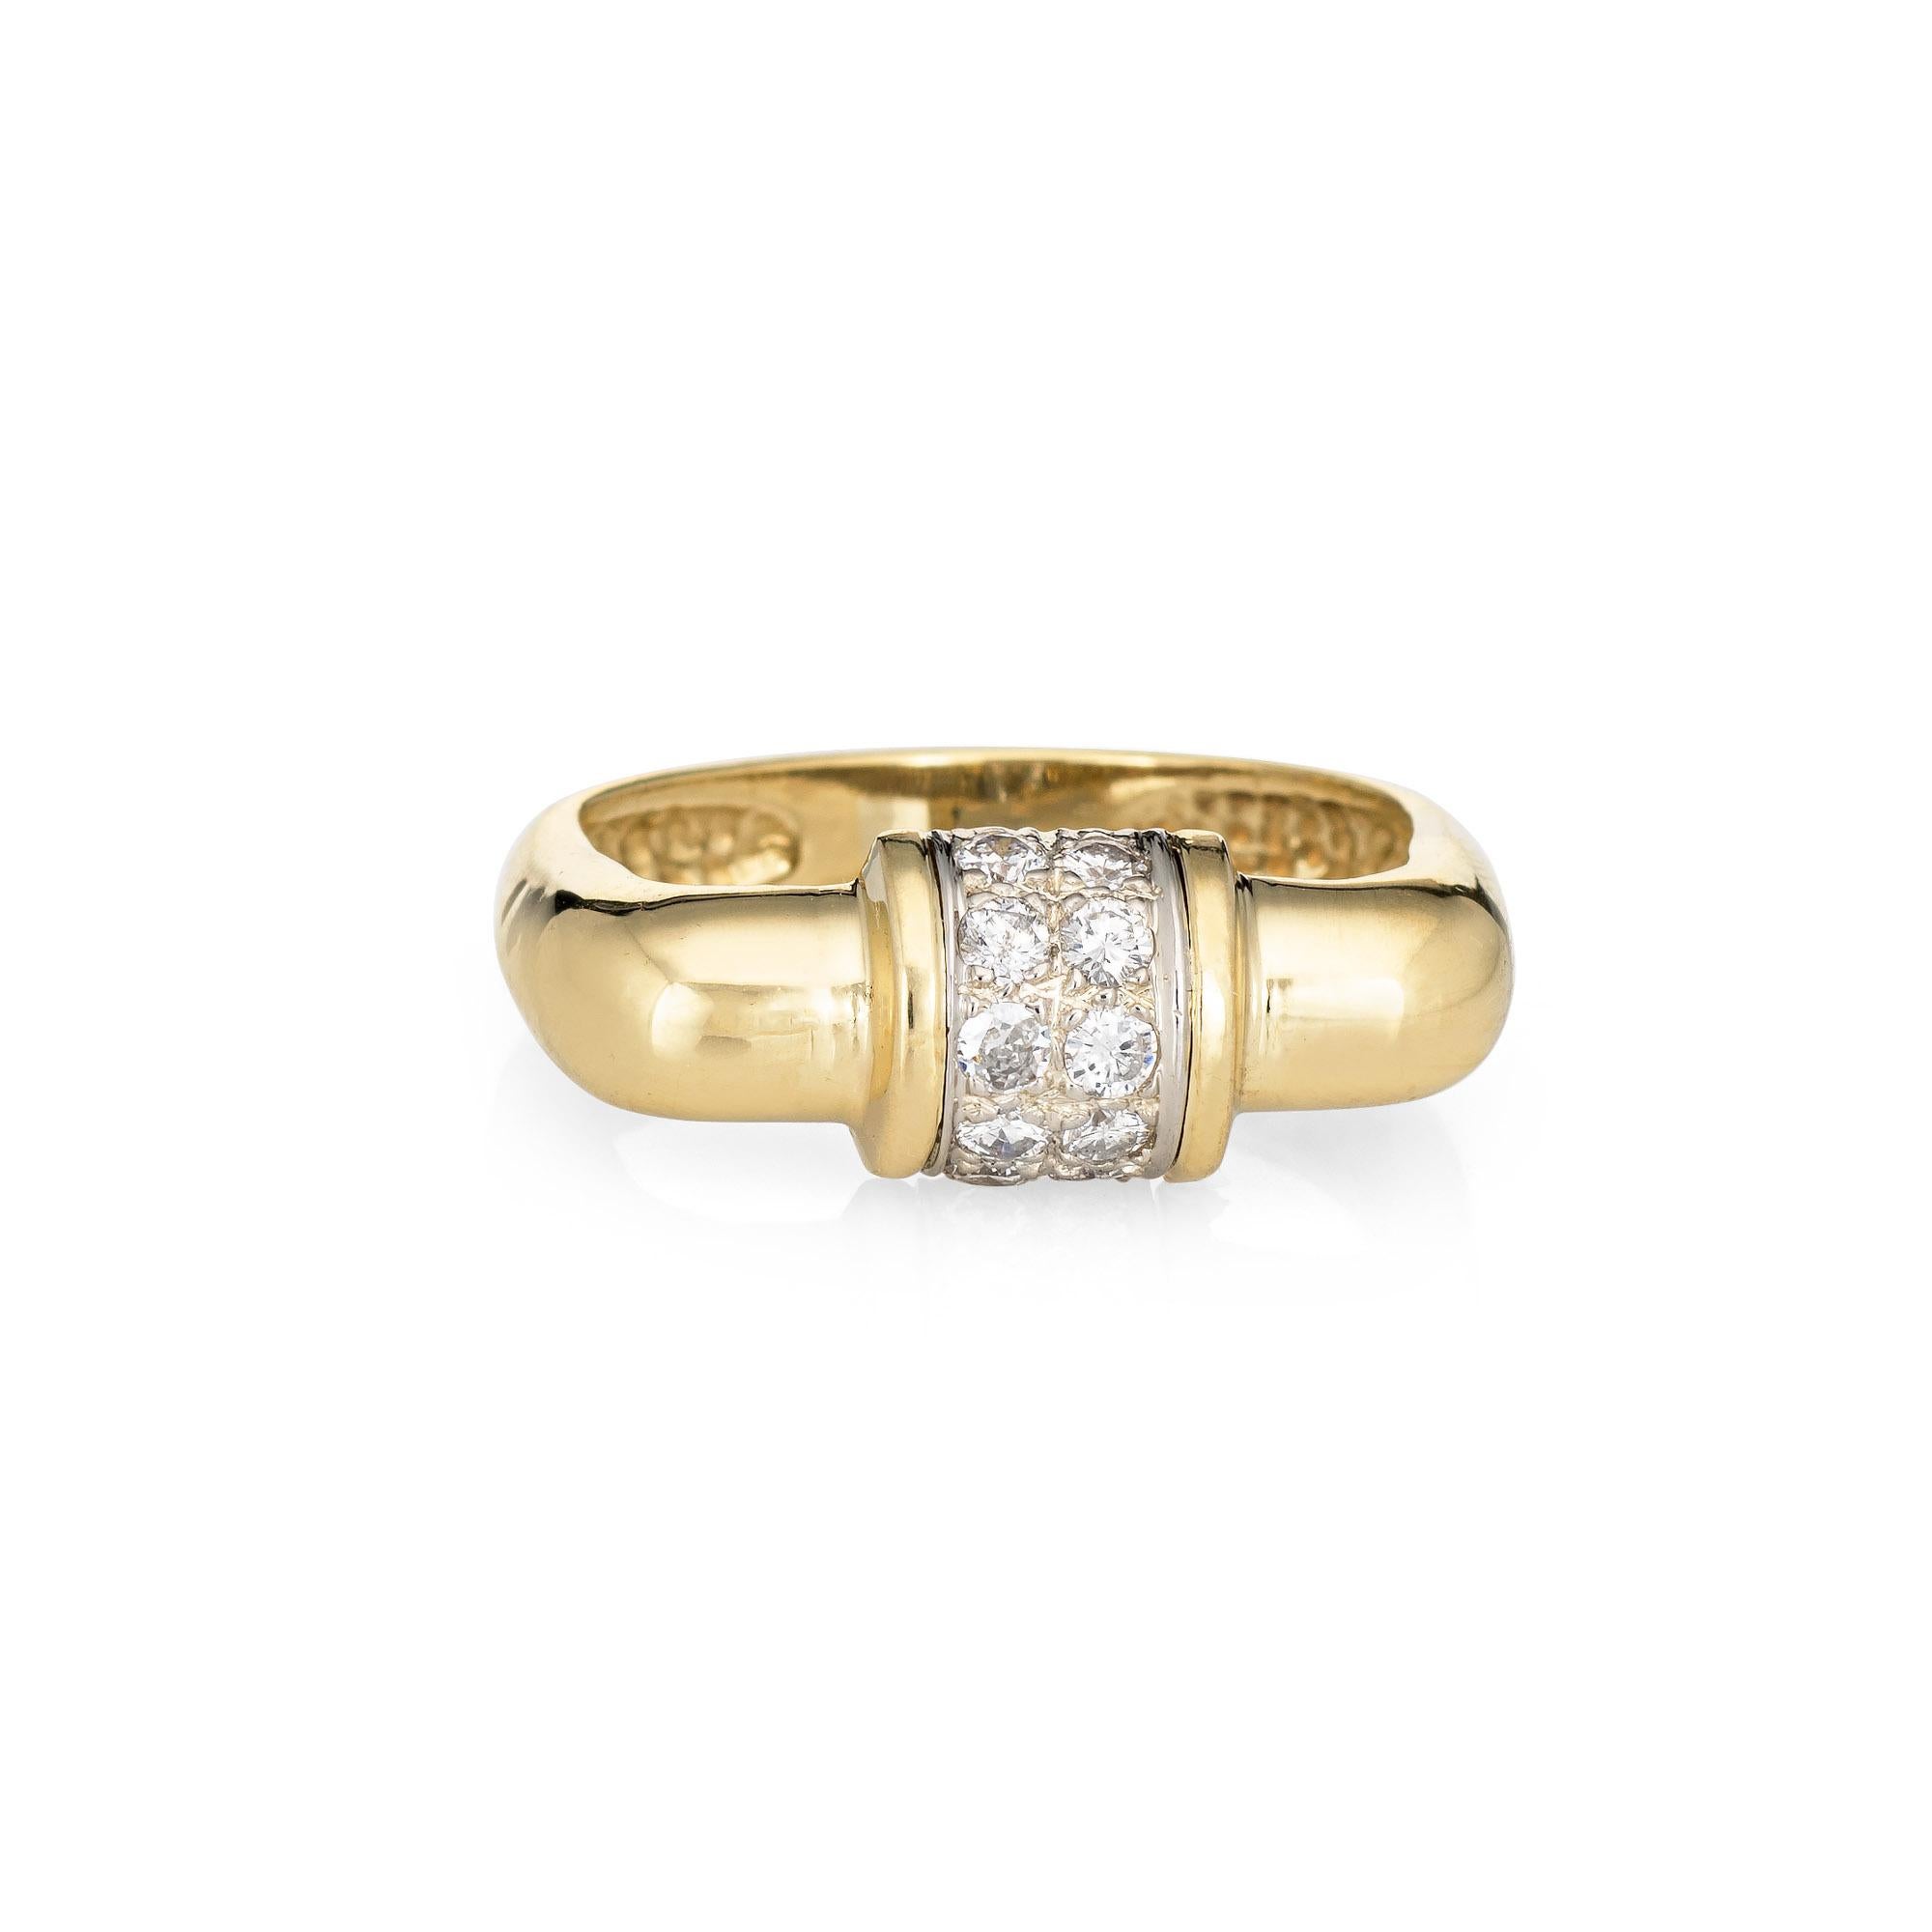 Stylish vintage square diamond stacking ring (circa 1970s) crafted in 18 karat yellow gold. 

10 diamonds are estimated at 0.02 carats each and total an estimated 0.20 carats (estimated at G-H color and VS1-2 clarity).
The striking square ring